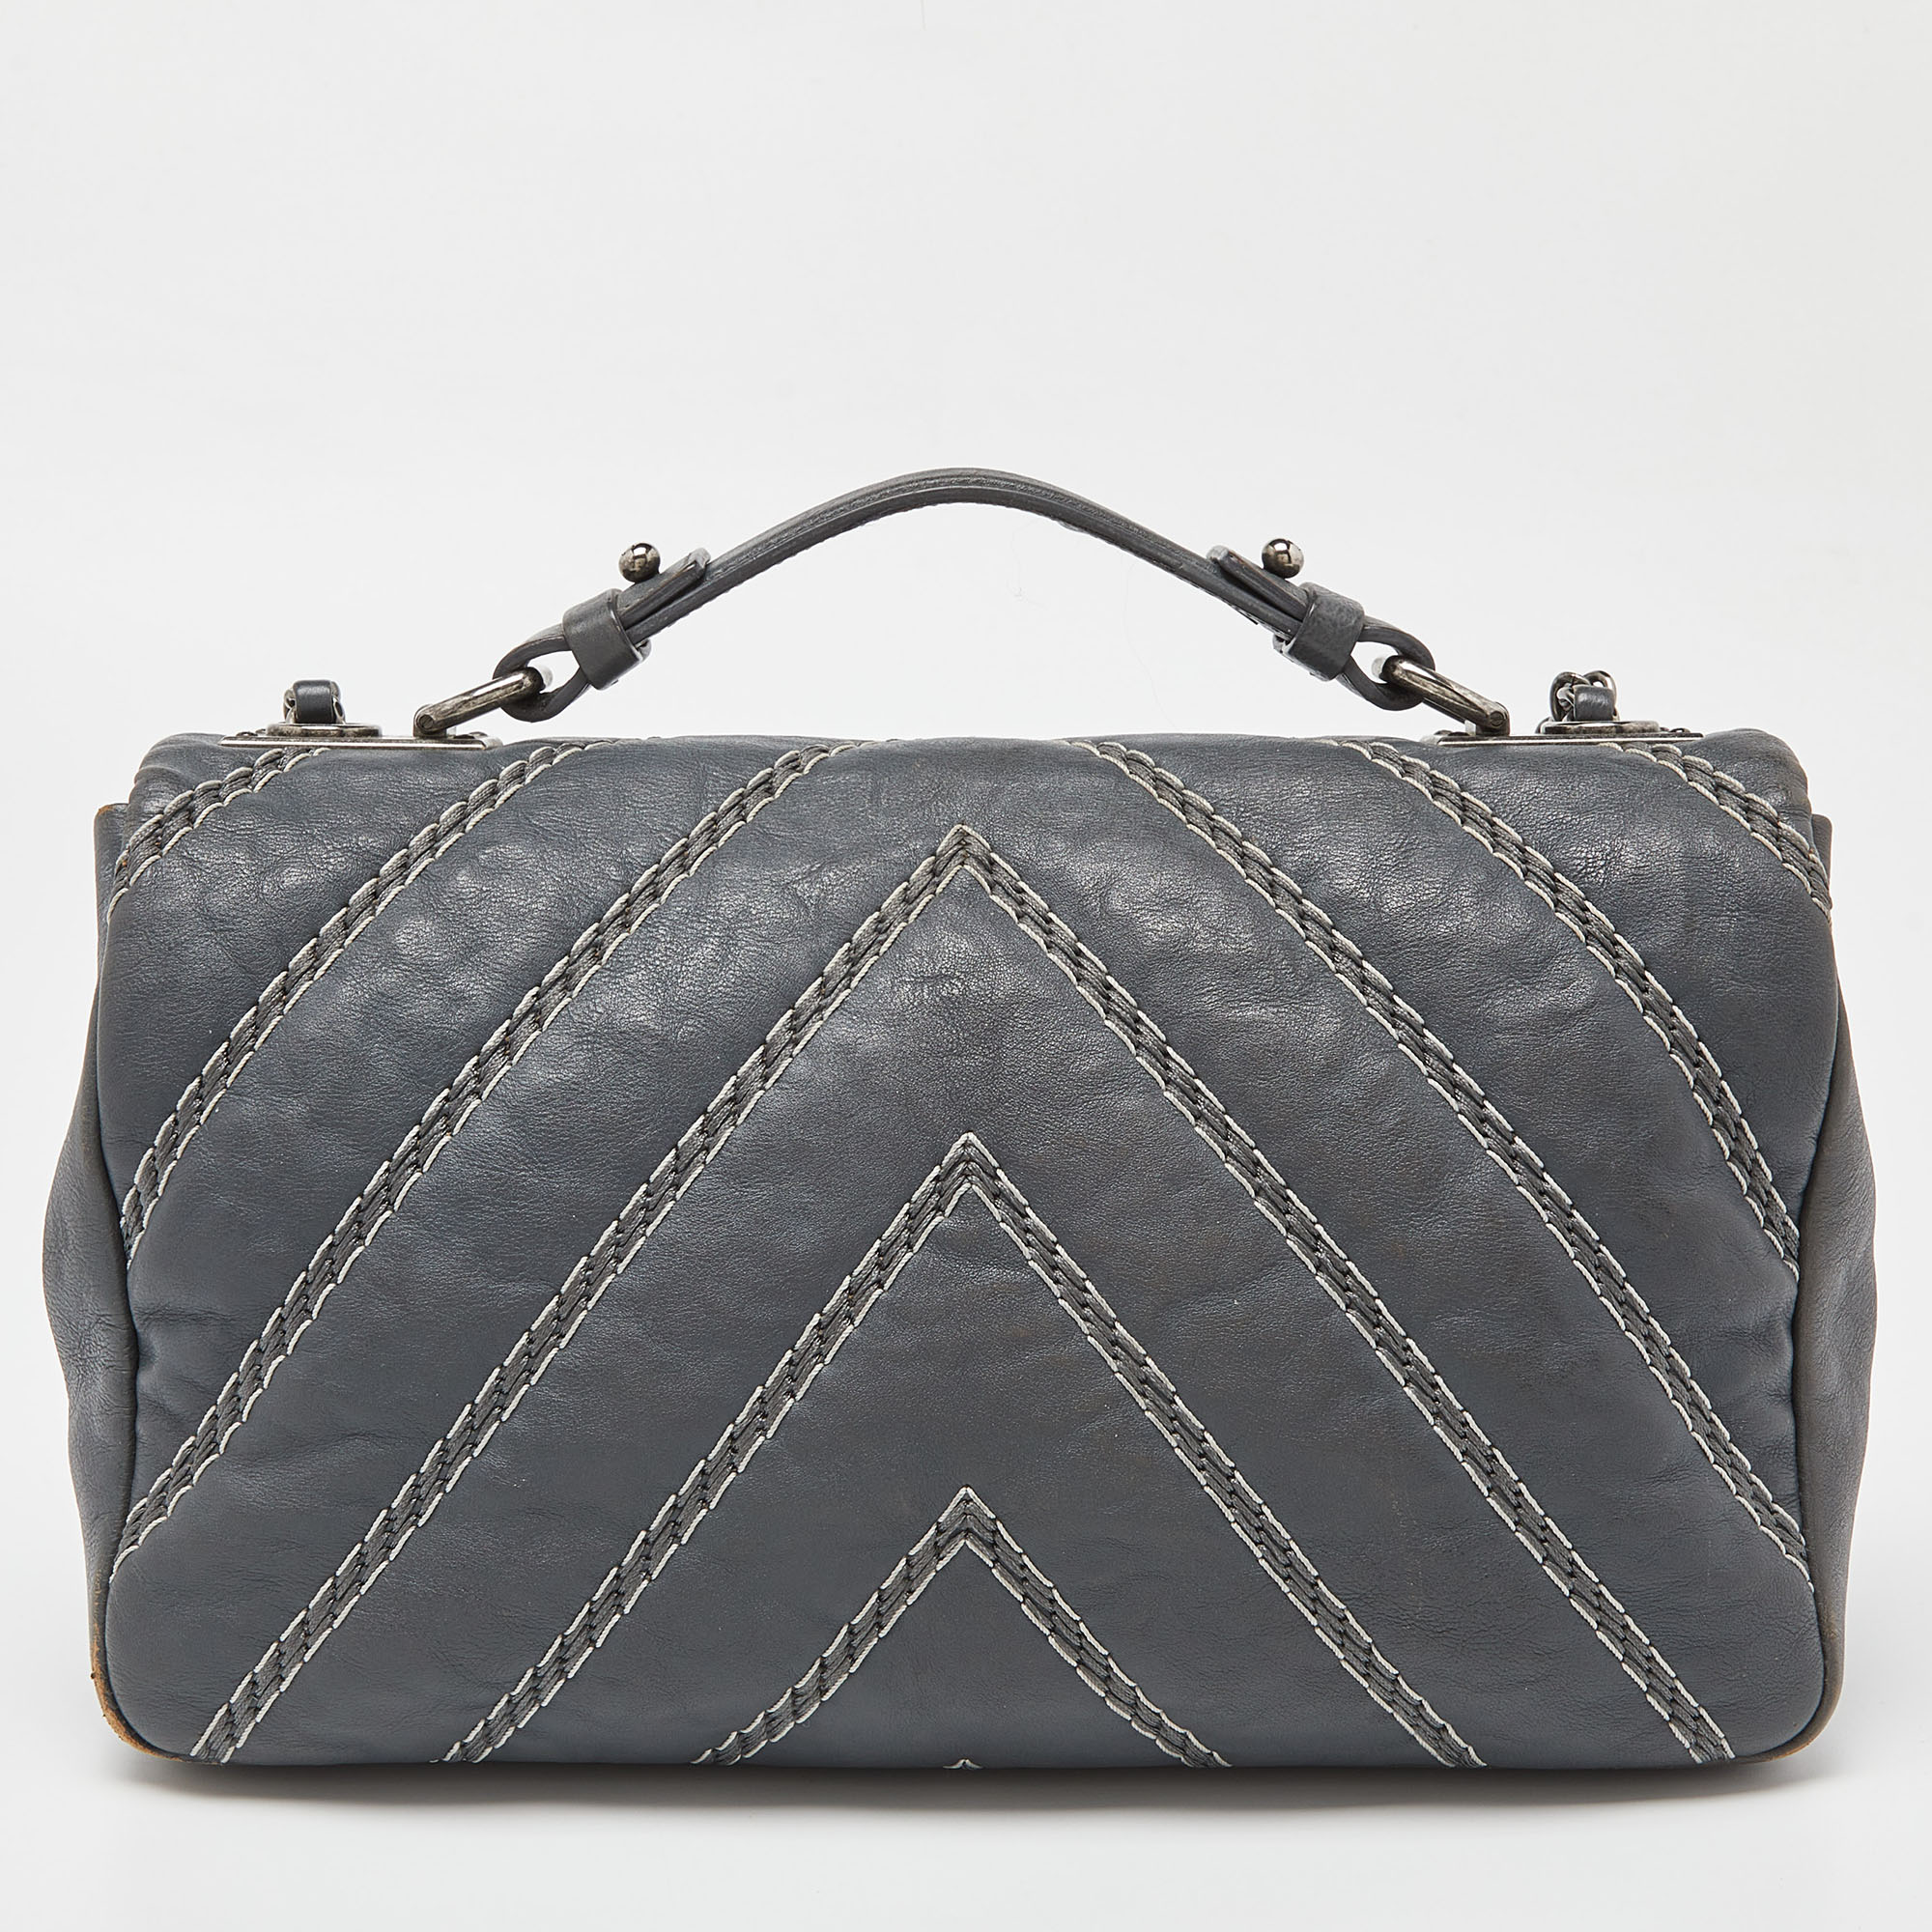 Chanel Grey Chevron Stitched Leather CC Top Handle Flap Bag